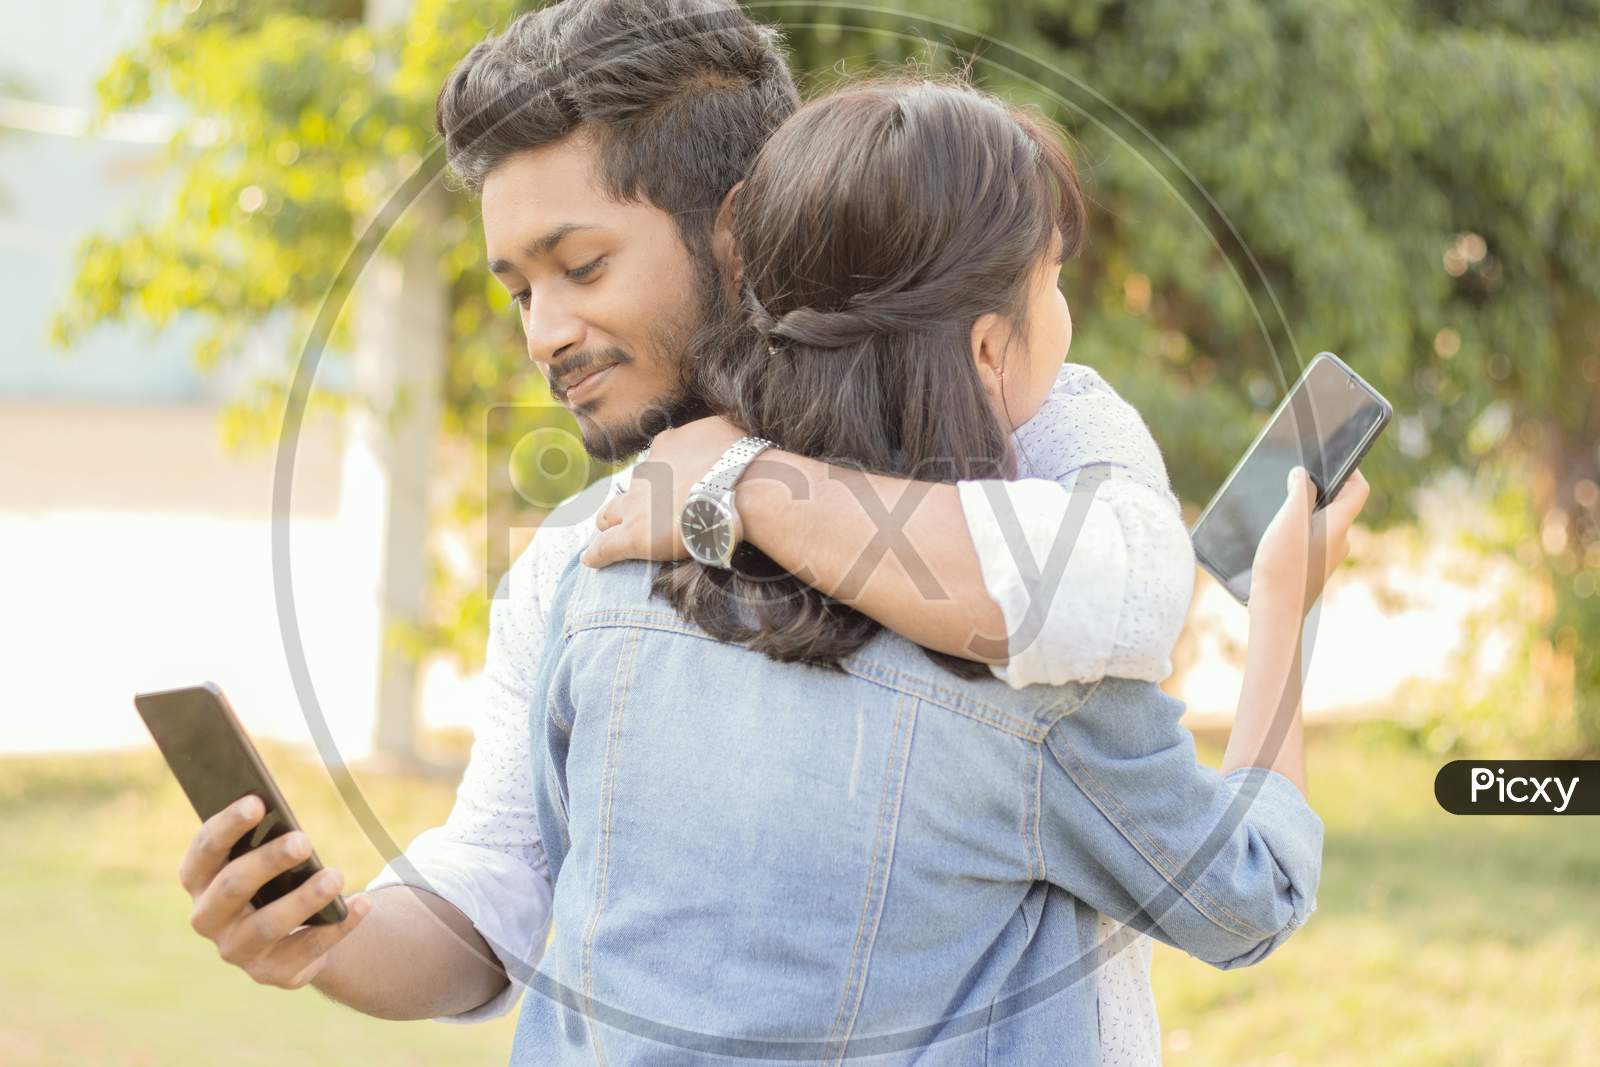 A Couple in Hugged pose using a Smartphone